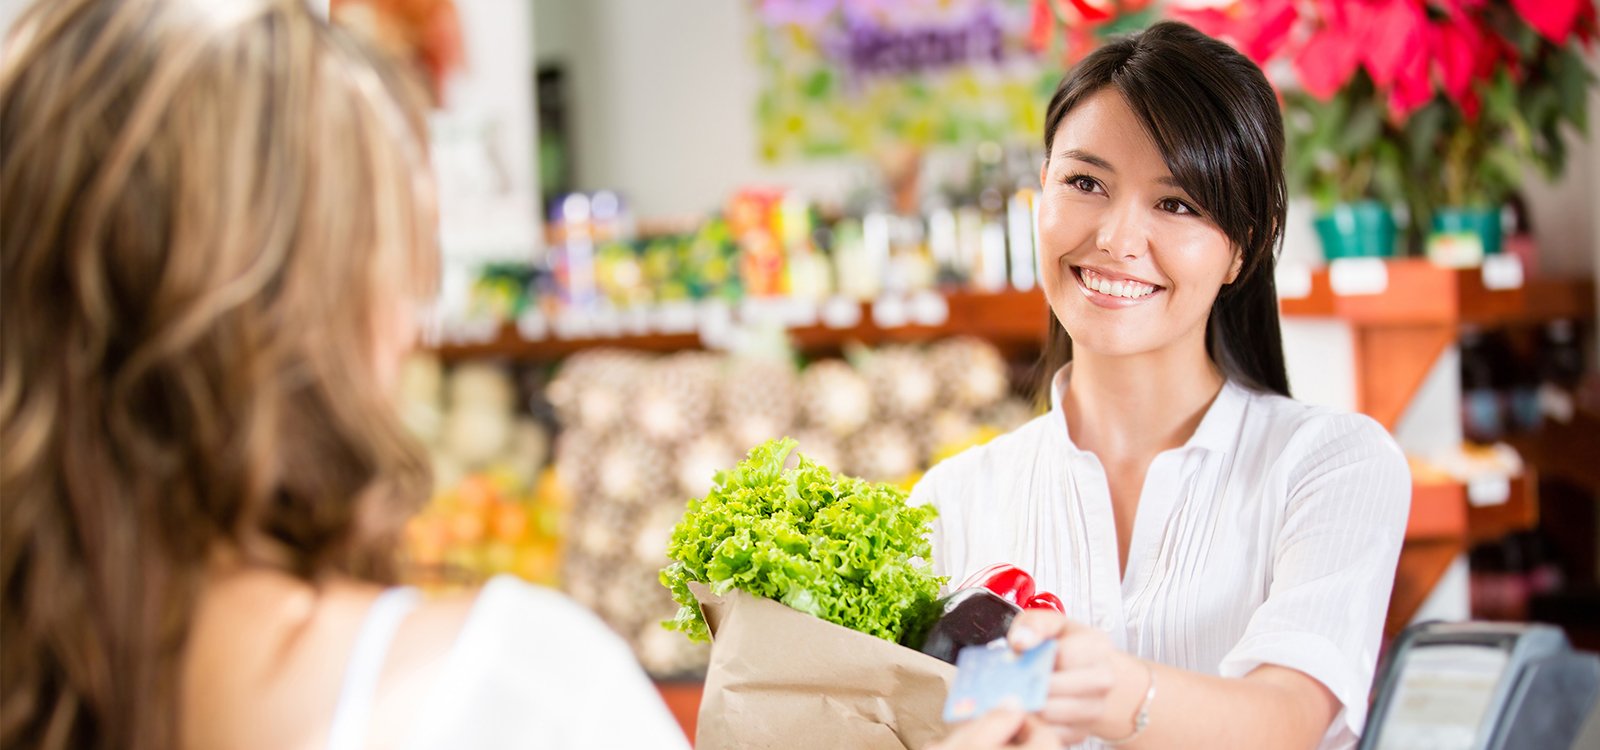 woman-buying-groceries-with-card